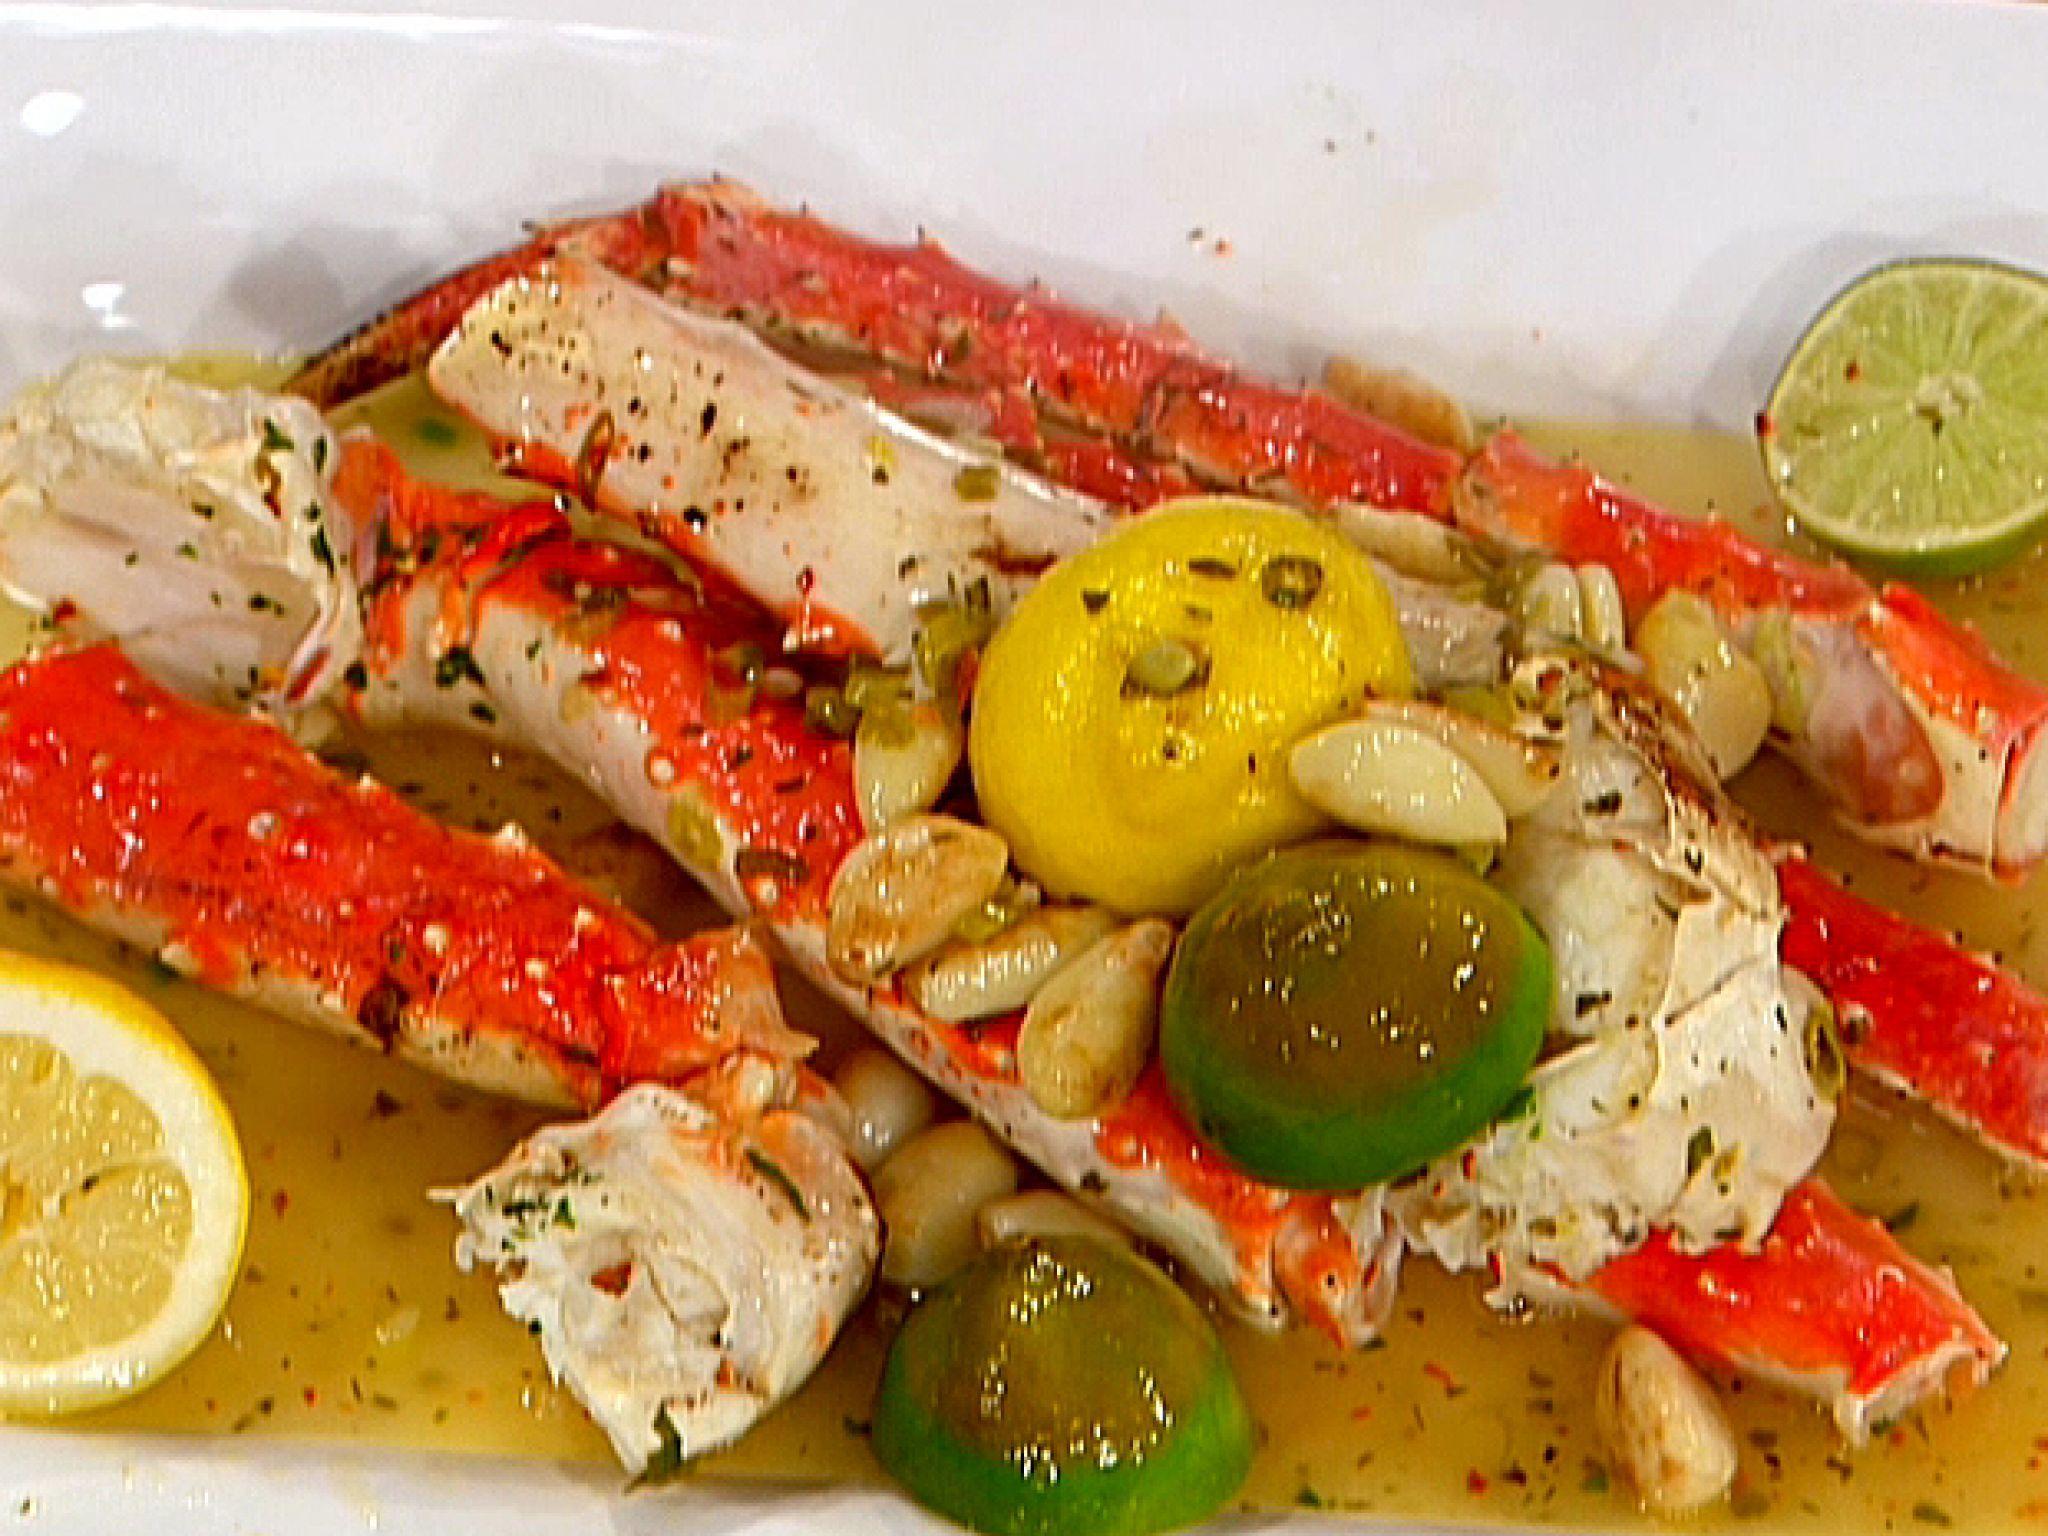 Sauteed King Crab in White Wine recipe from Emeril Lagasse via Food